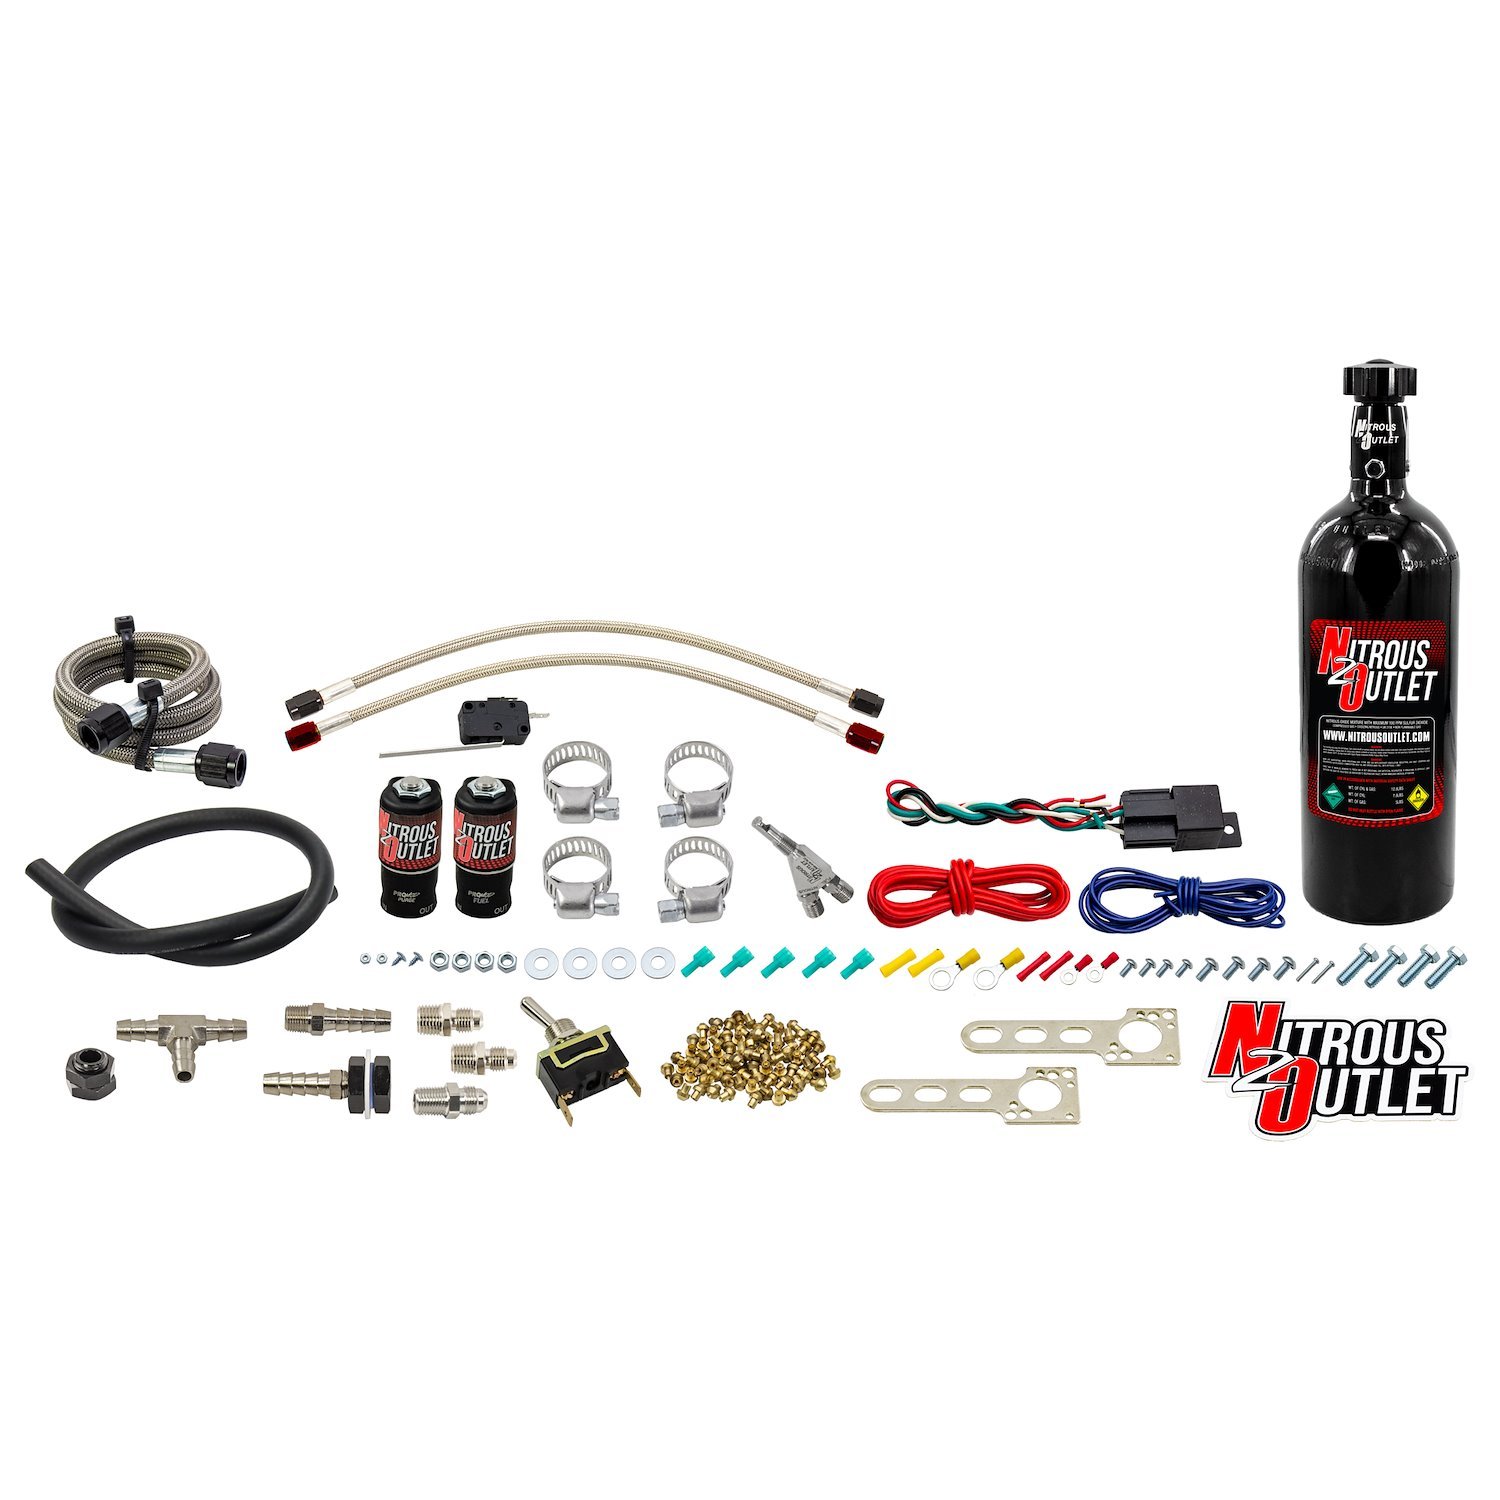 50-10012-5 Powersports Single-Cyl Wet Nozzle System, Stainless 90-Degree Nozzle, Gas, 6 psi, 1015202530 HP, 5LB Bottle